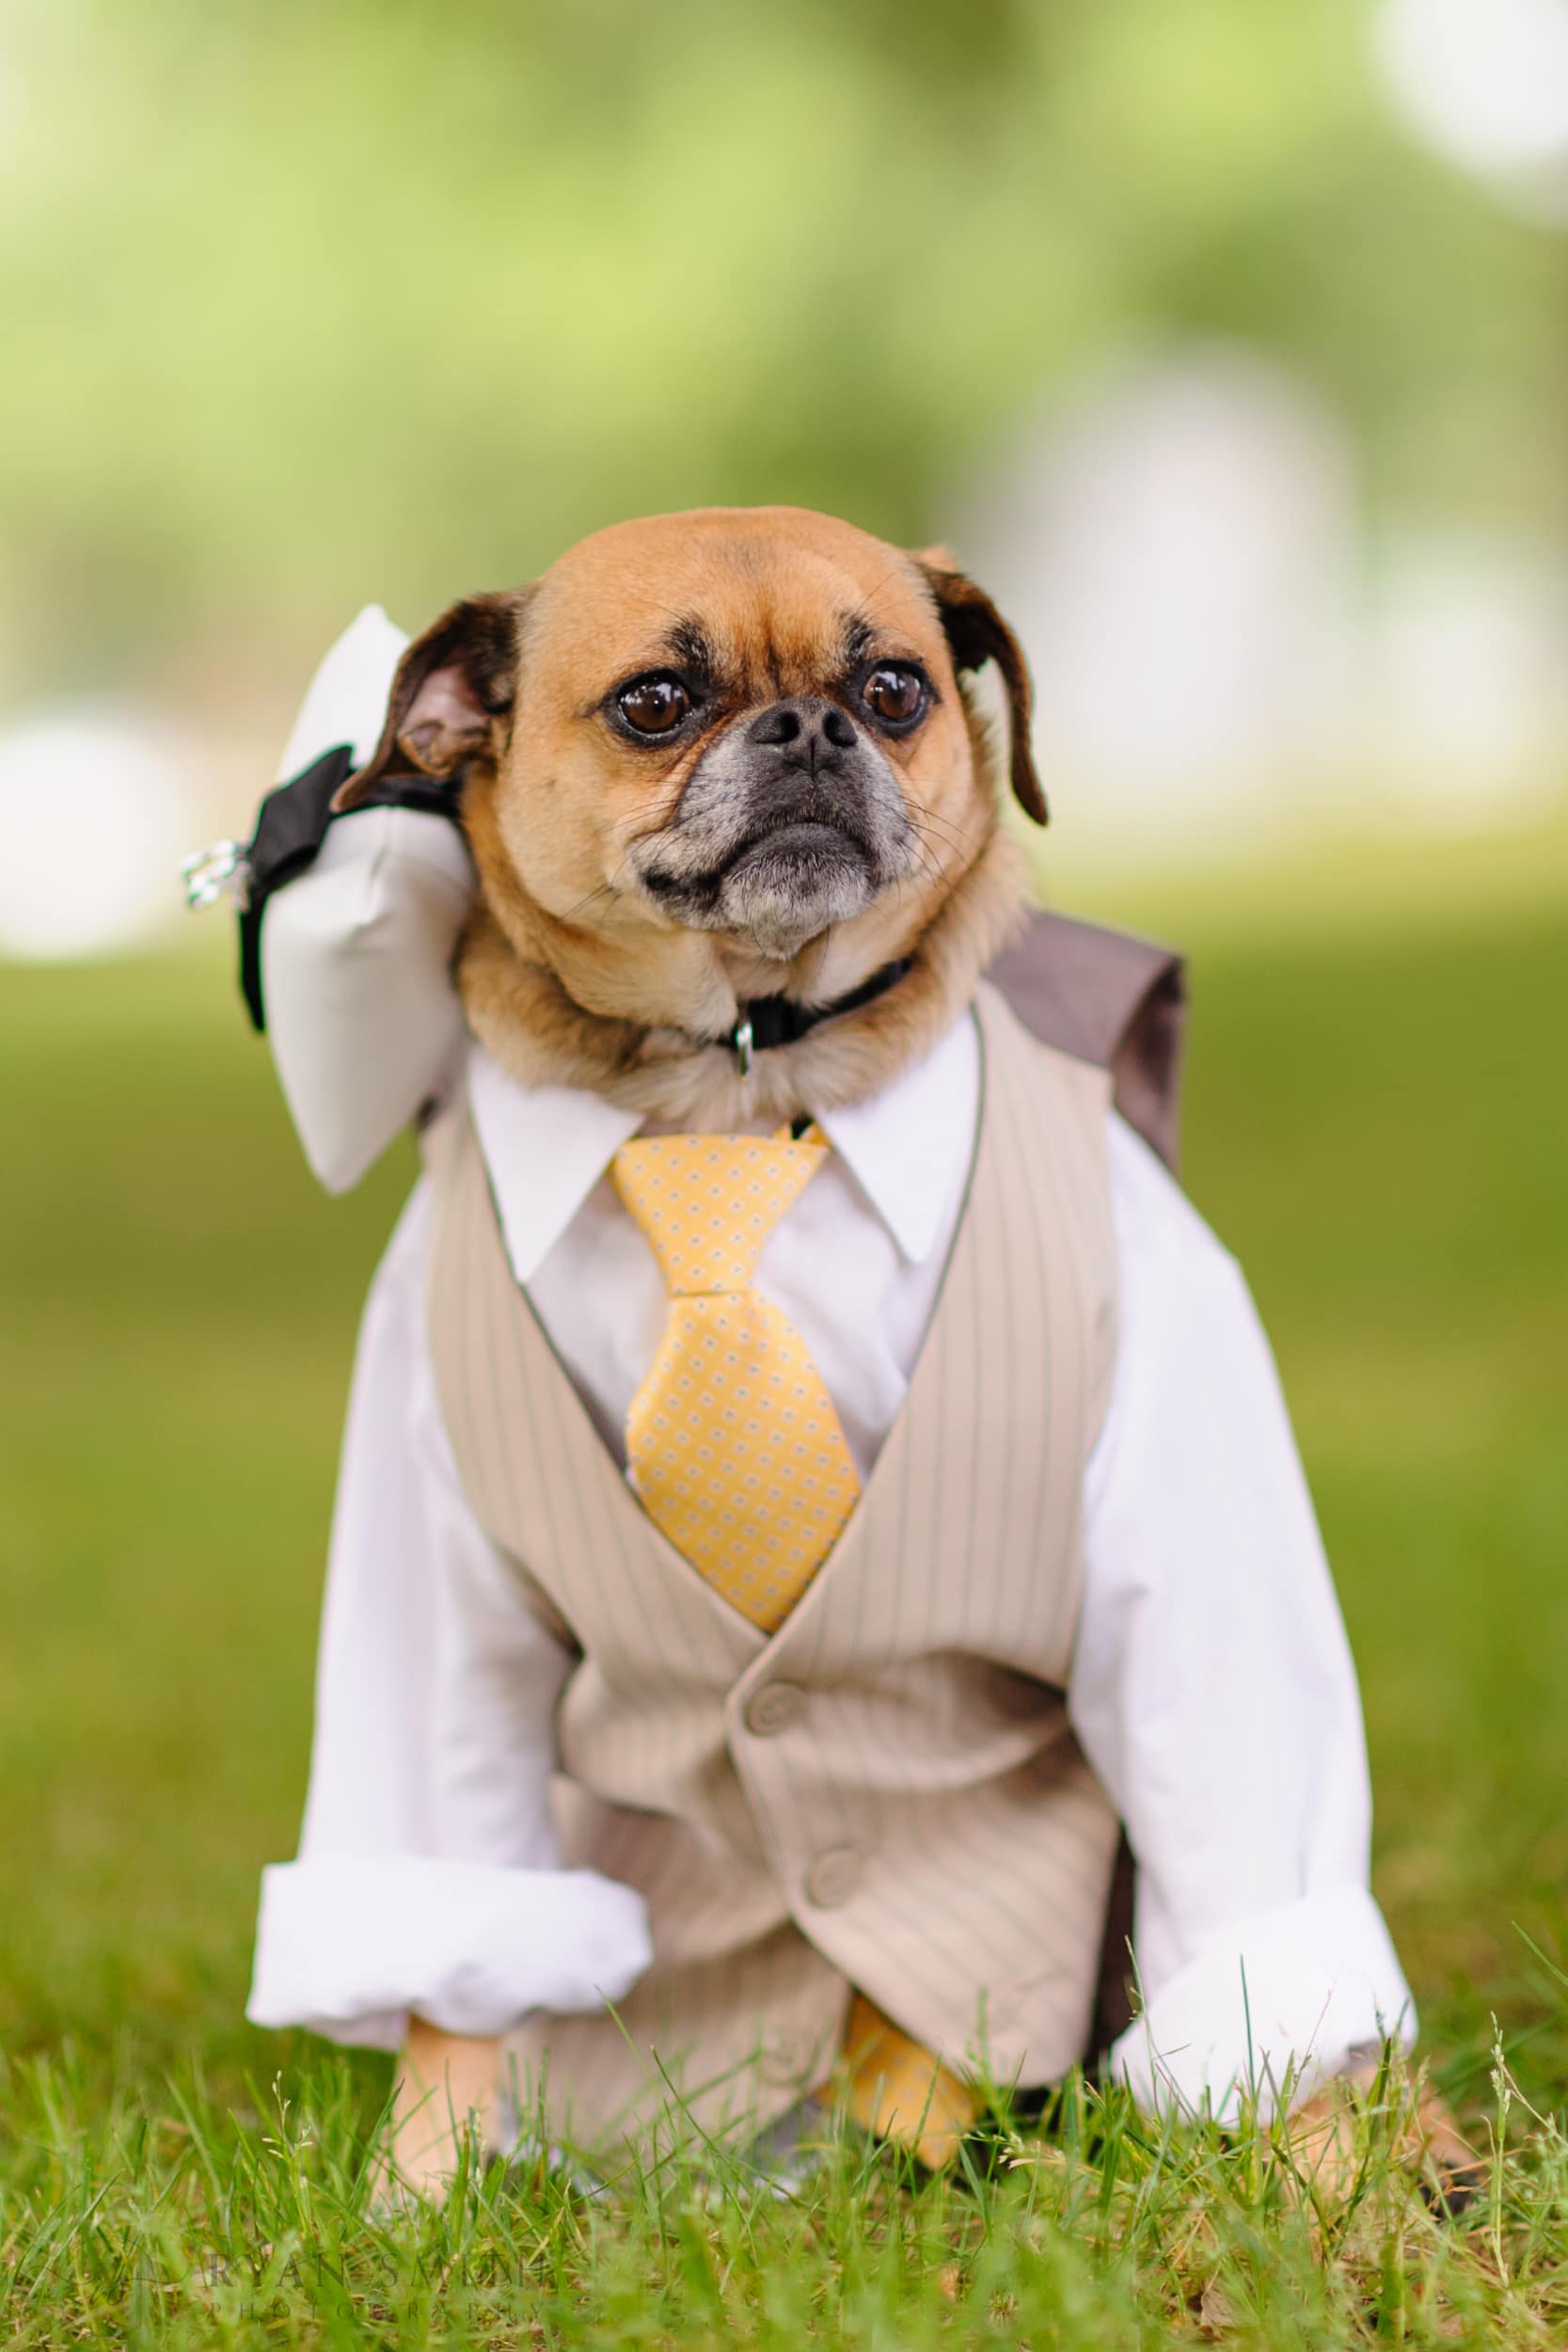 Dog dressed in suit and tie as ring bearer - Litchfield Beach and Golf Resort